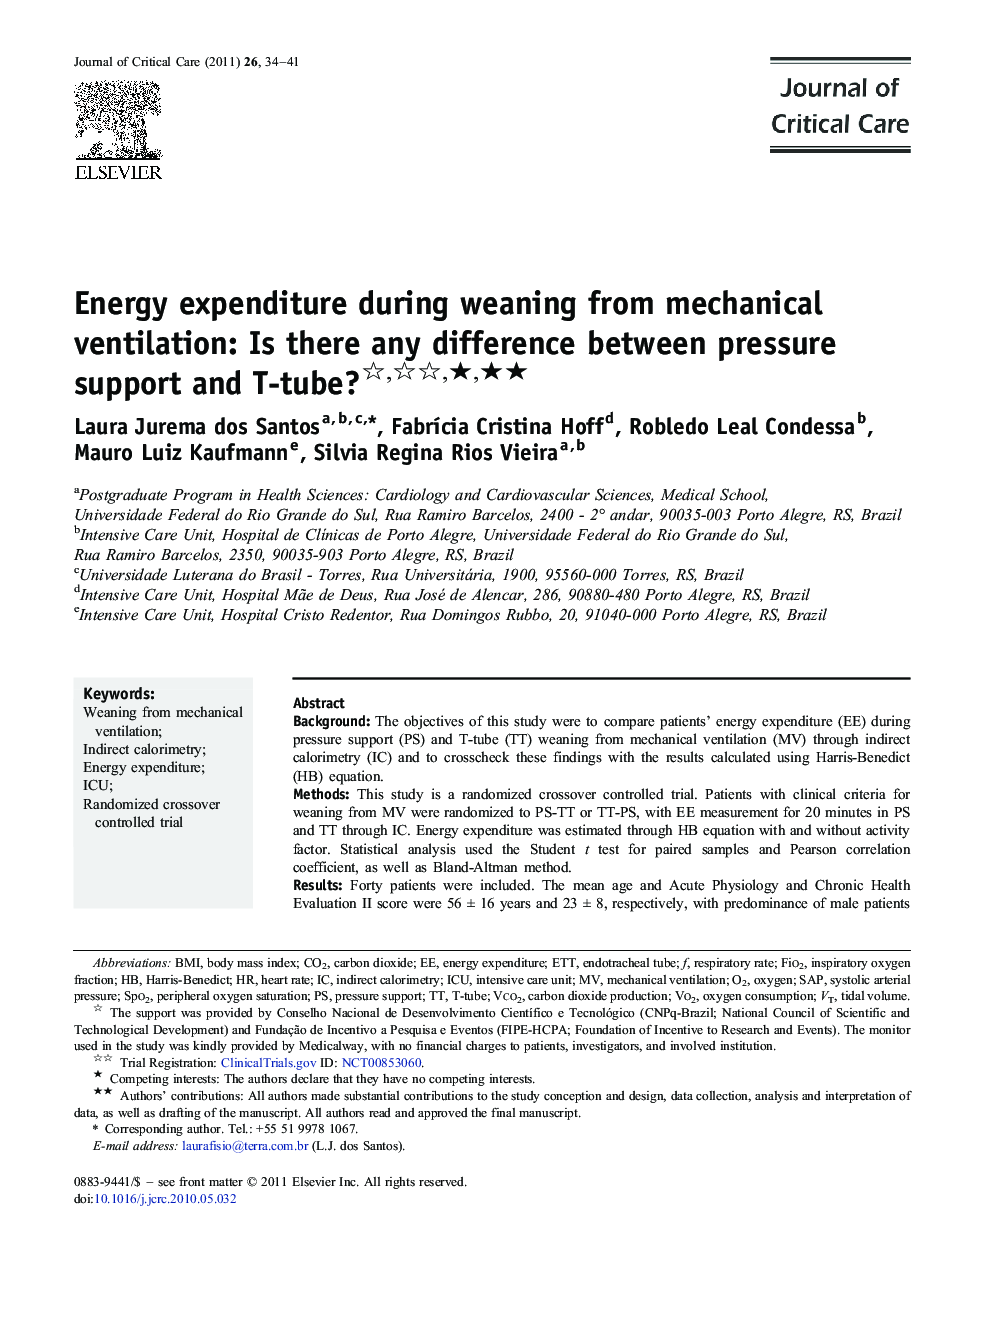 Energy expenditure during weaning from mechanical ventilation: Is there any difference between pressure support and T-tube? ★★★